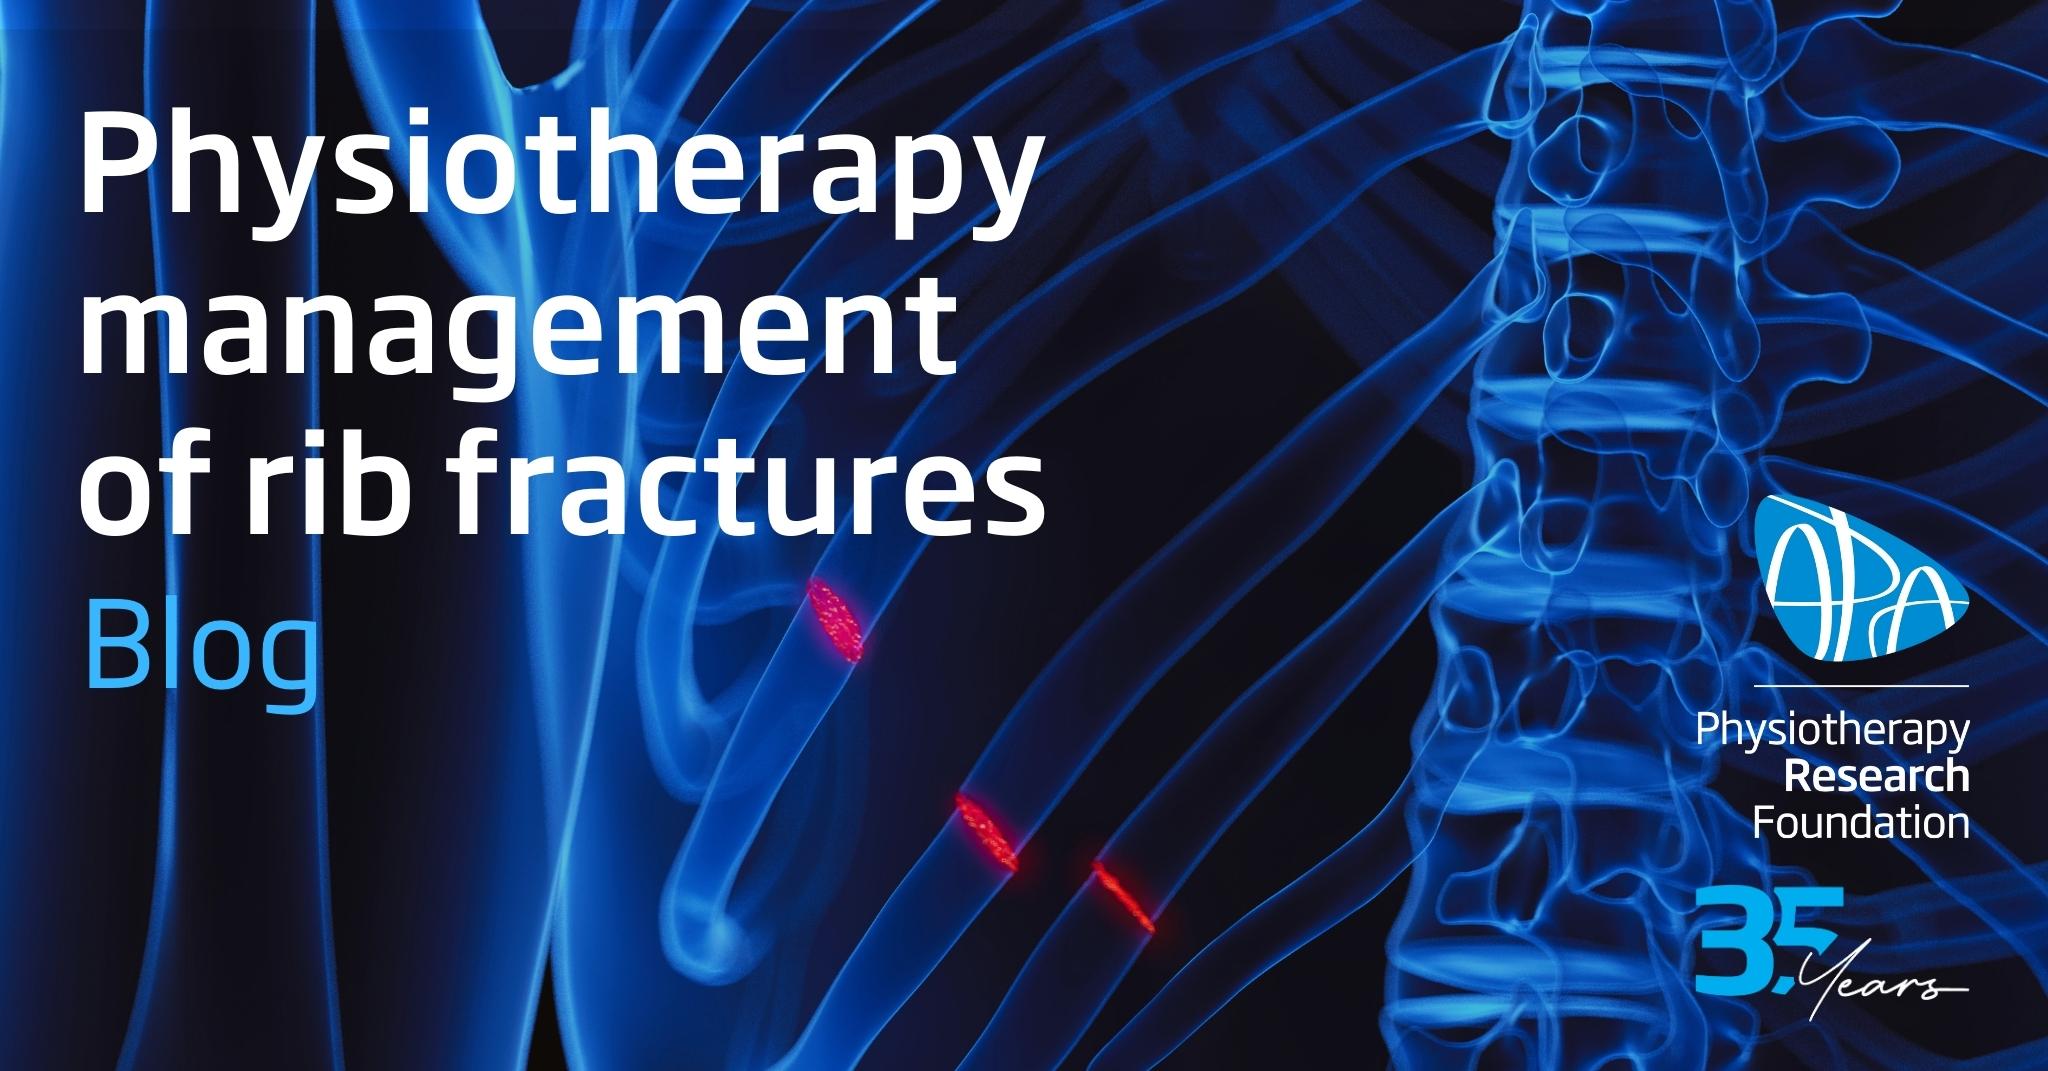 Physiotherapy management of rib fractures